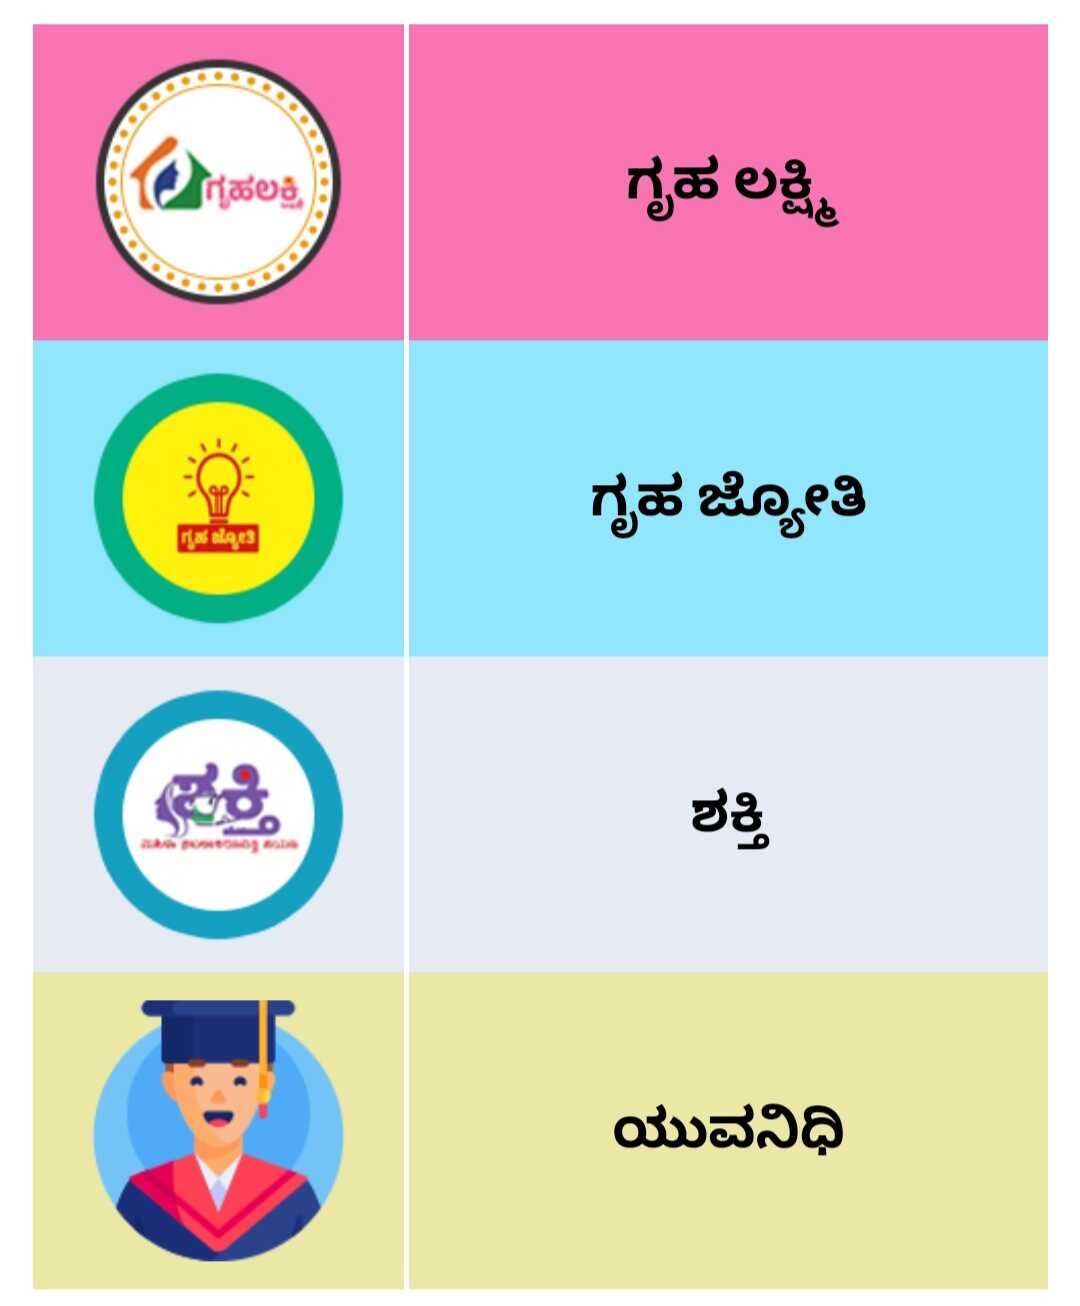 Gruha lakshmi Yojana Online Application Released Apply as Here is the Direct Link